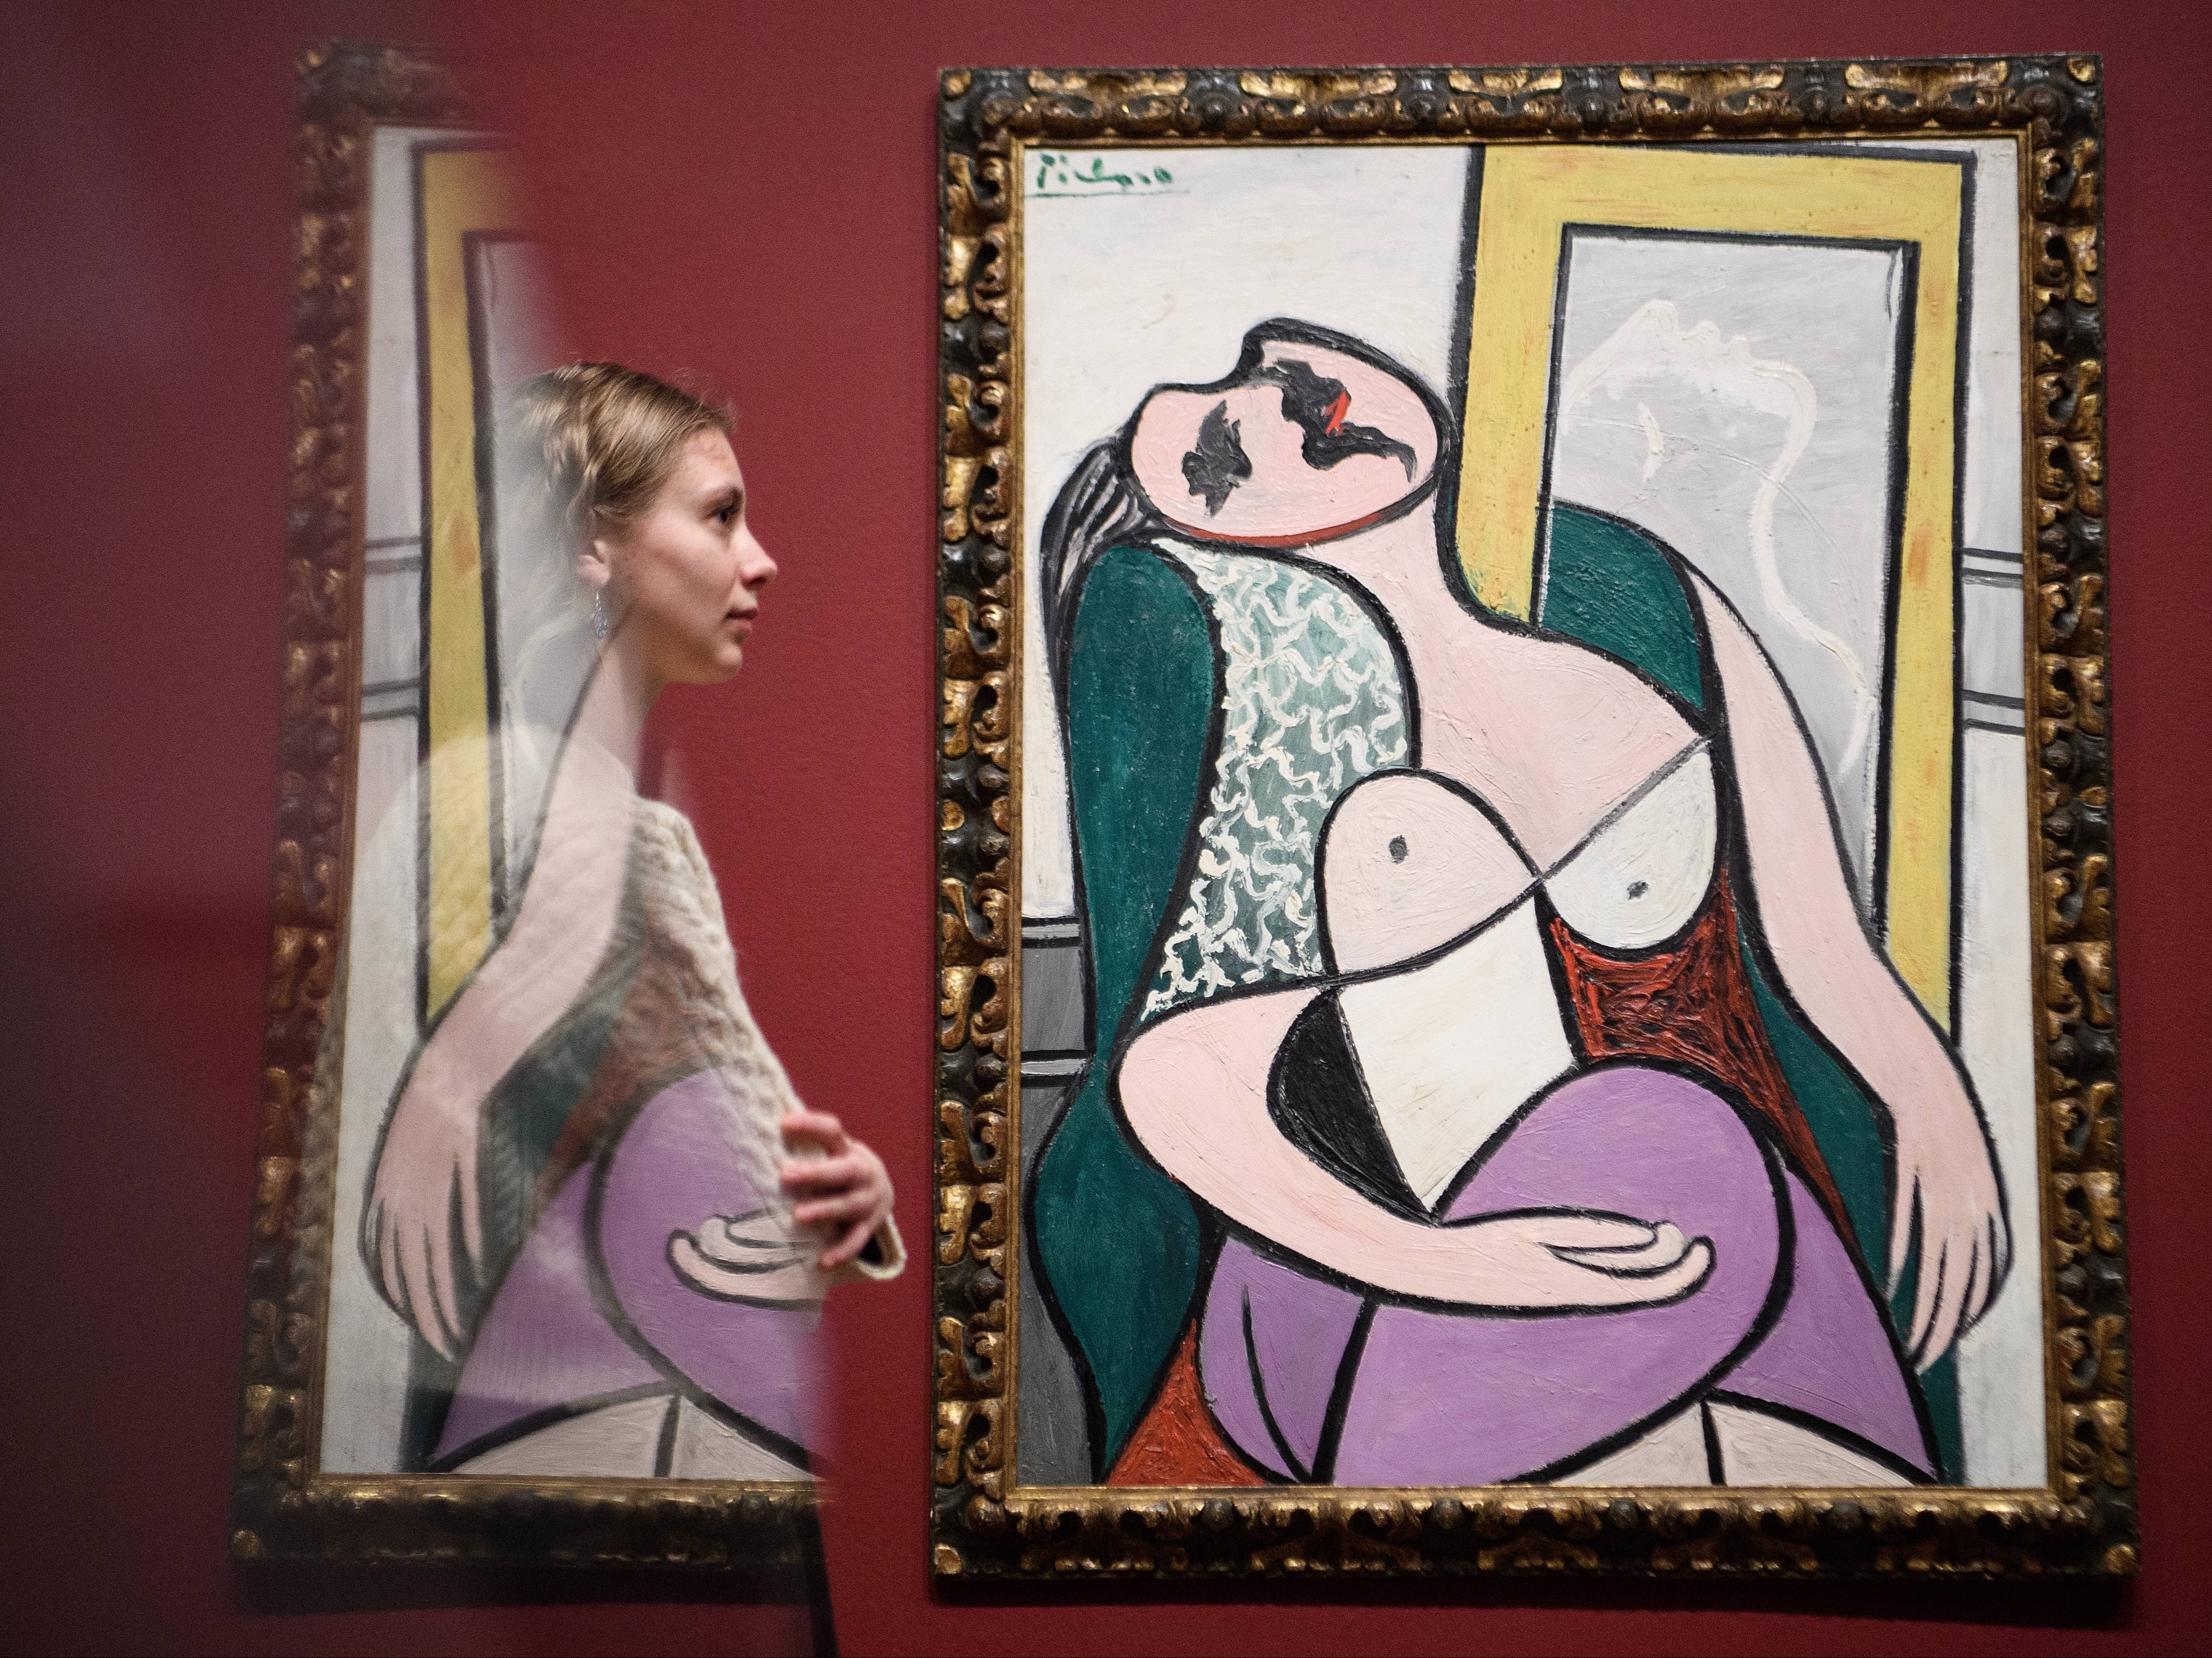 Pablo Picasso’s ‘Sleeping Woman by a Mirror’ at the Tate Modern in 2018